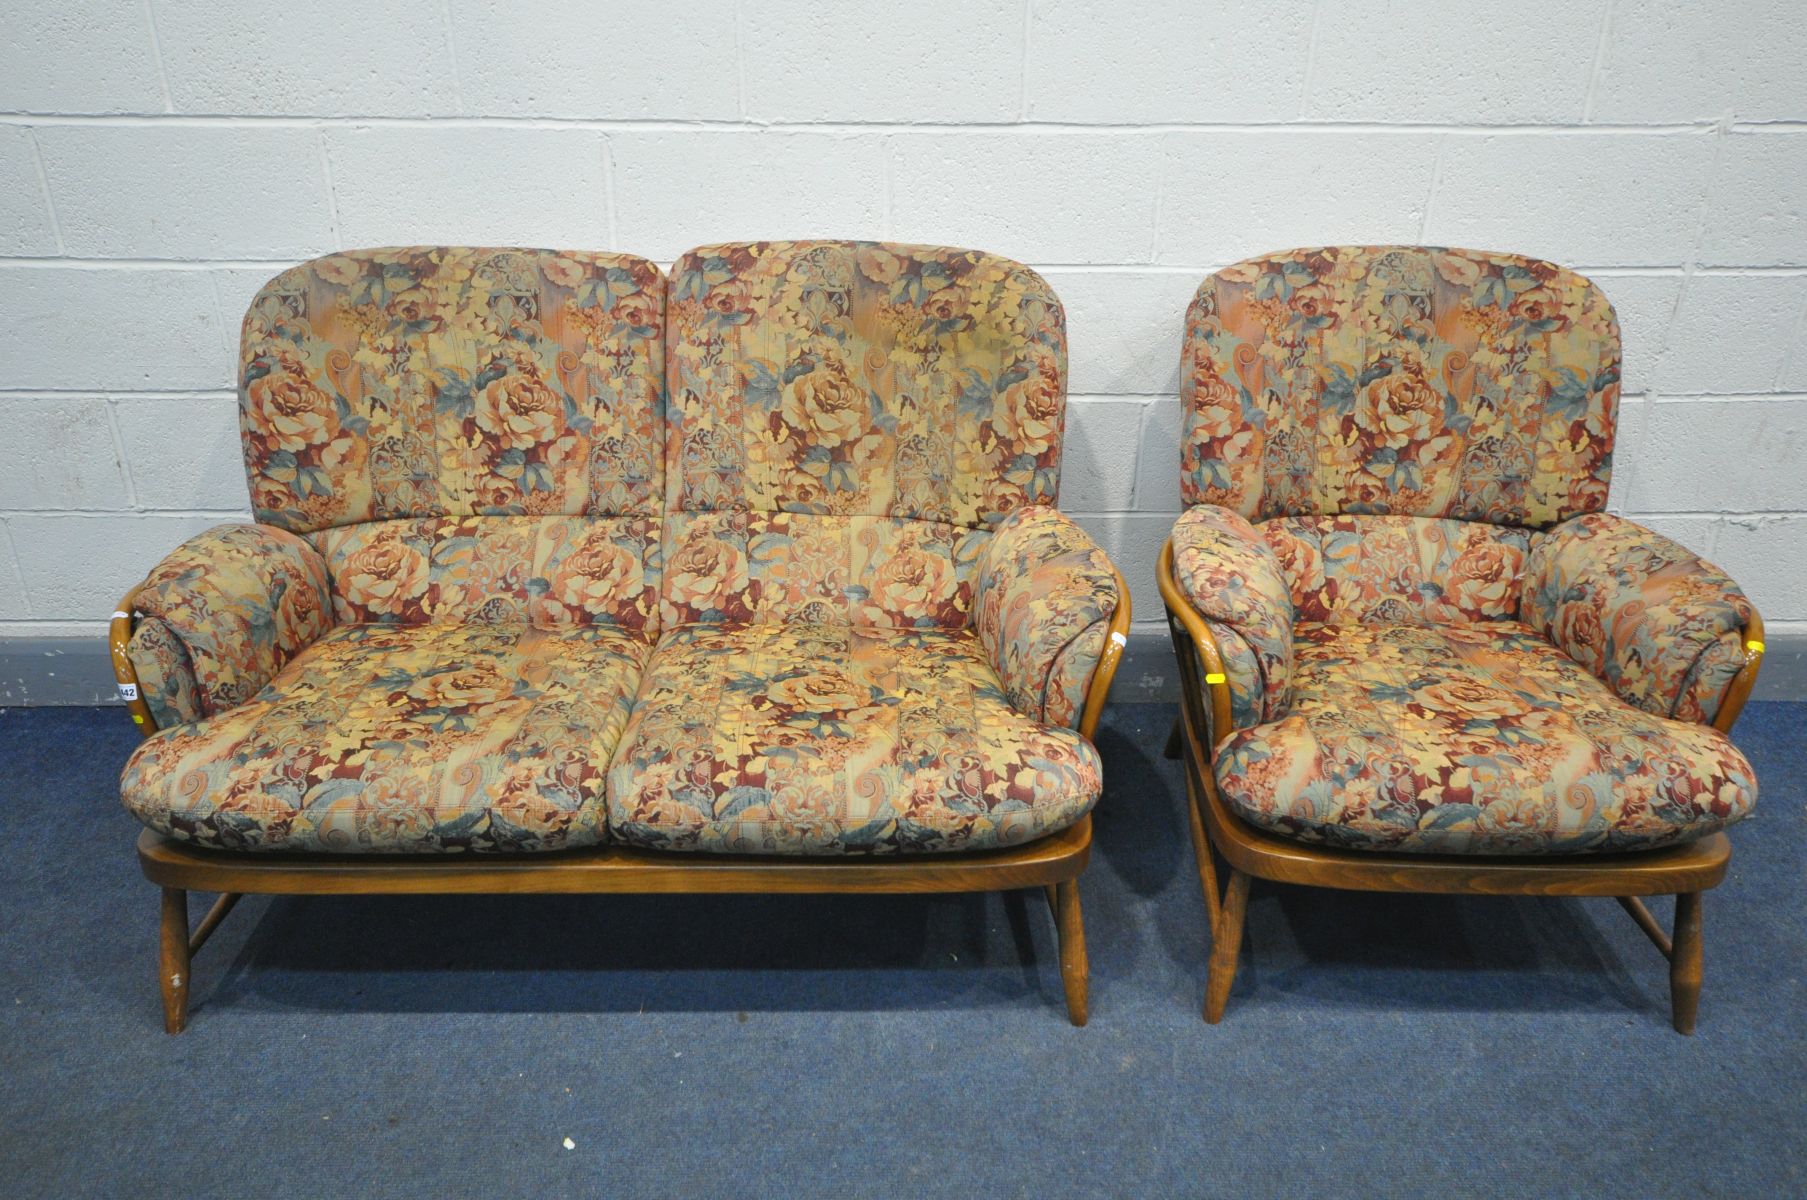 AN ERCOL ELM WINDSOR JUBILEE TWO PIECE LOUNGE SUITE, comprising of a two seater sofa and an arm